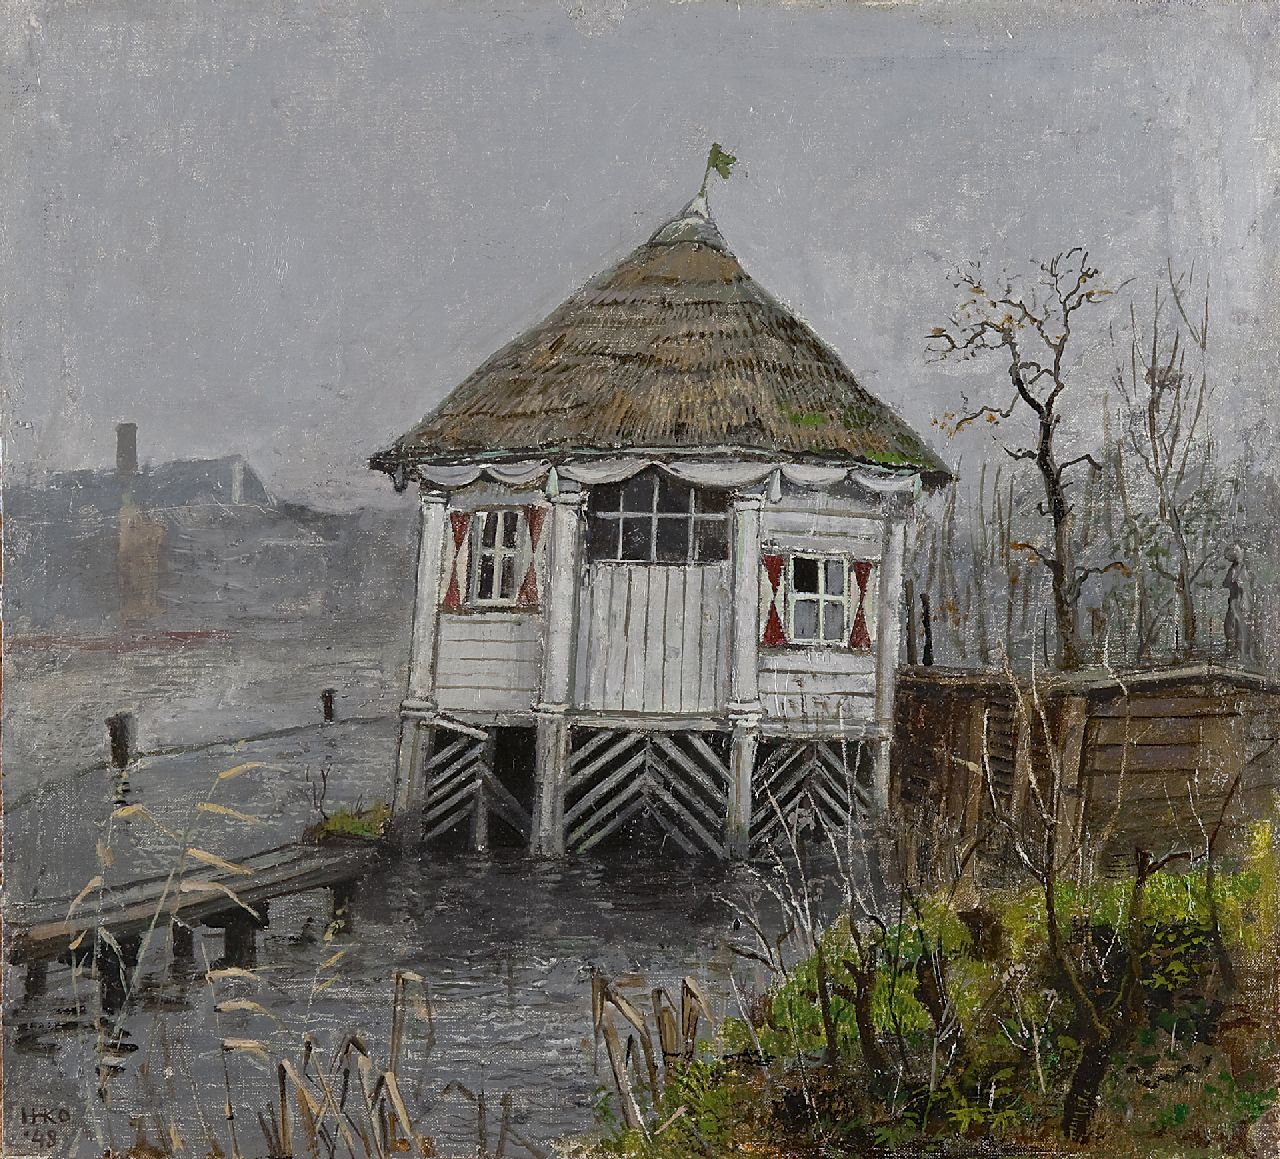 Kamerlingh Onnes H.H.  | 'Harm' Henrick Kamerlingh Onnes, A pavilion by the water, oil on canvas laid down on panel 33.1 x 36.5 cm, signed l.l. with init and in full on a sticker on the rev and dated '48